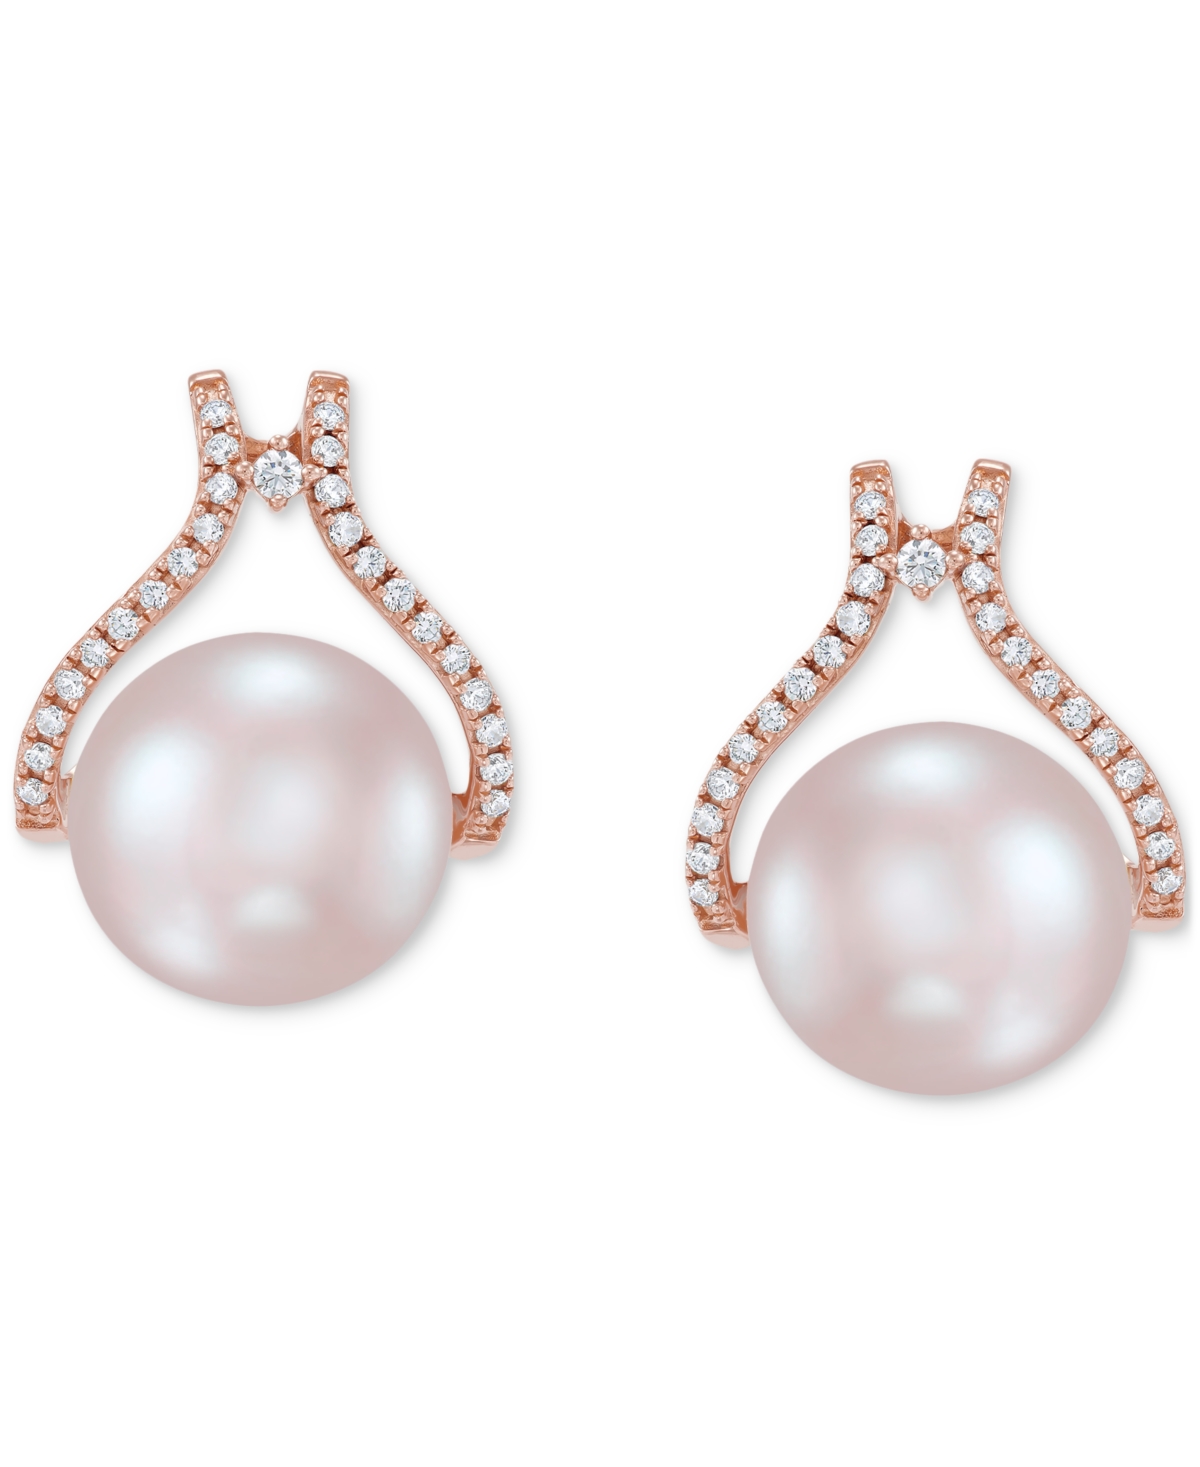 Cultured Natural Ming Pearl (12mm) & Diamond (1/3 ct. t.w.) Drop Earrings in 14k Rose Gold (Also in Cultured White Ming Pearl) - Rose Gold